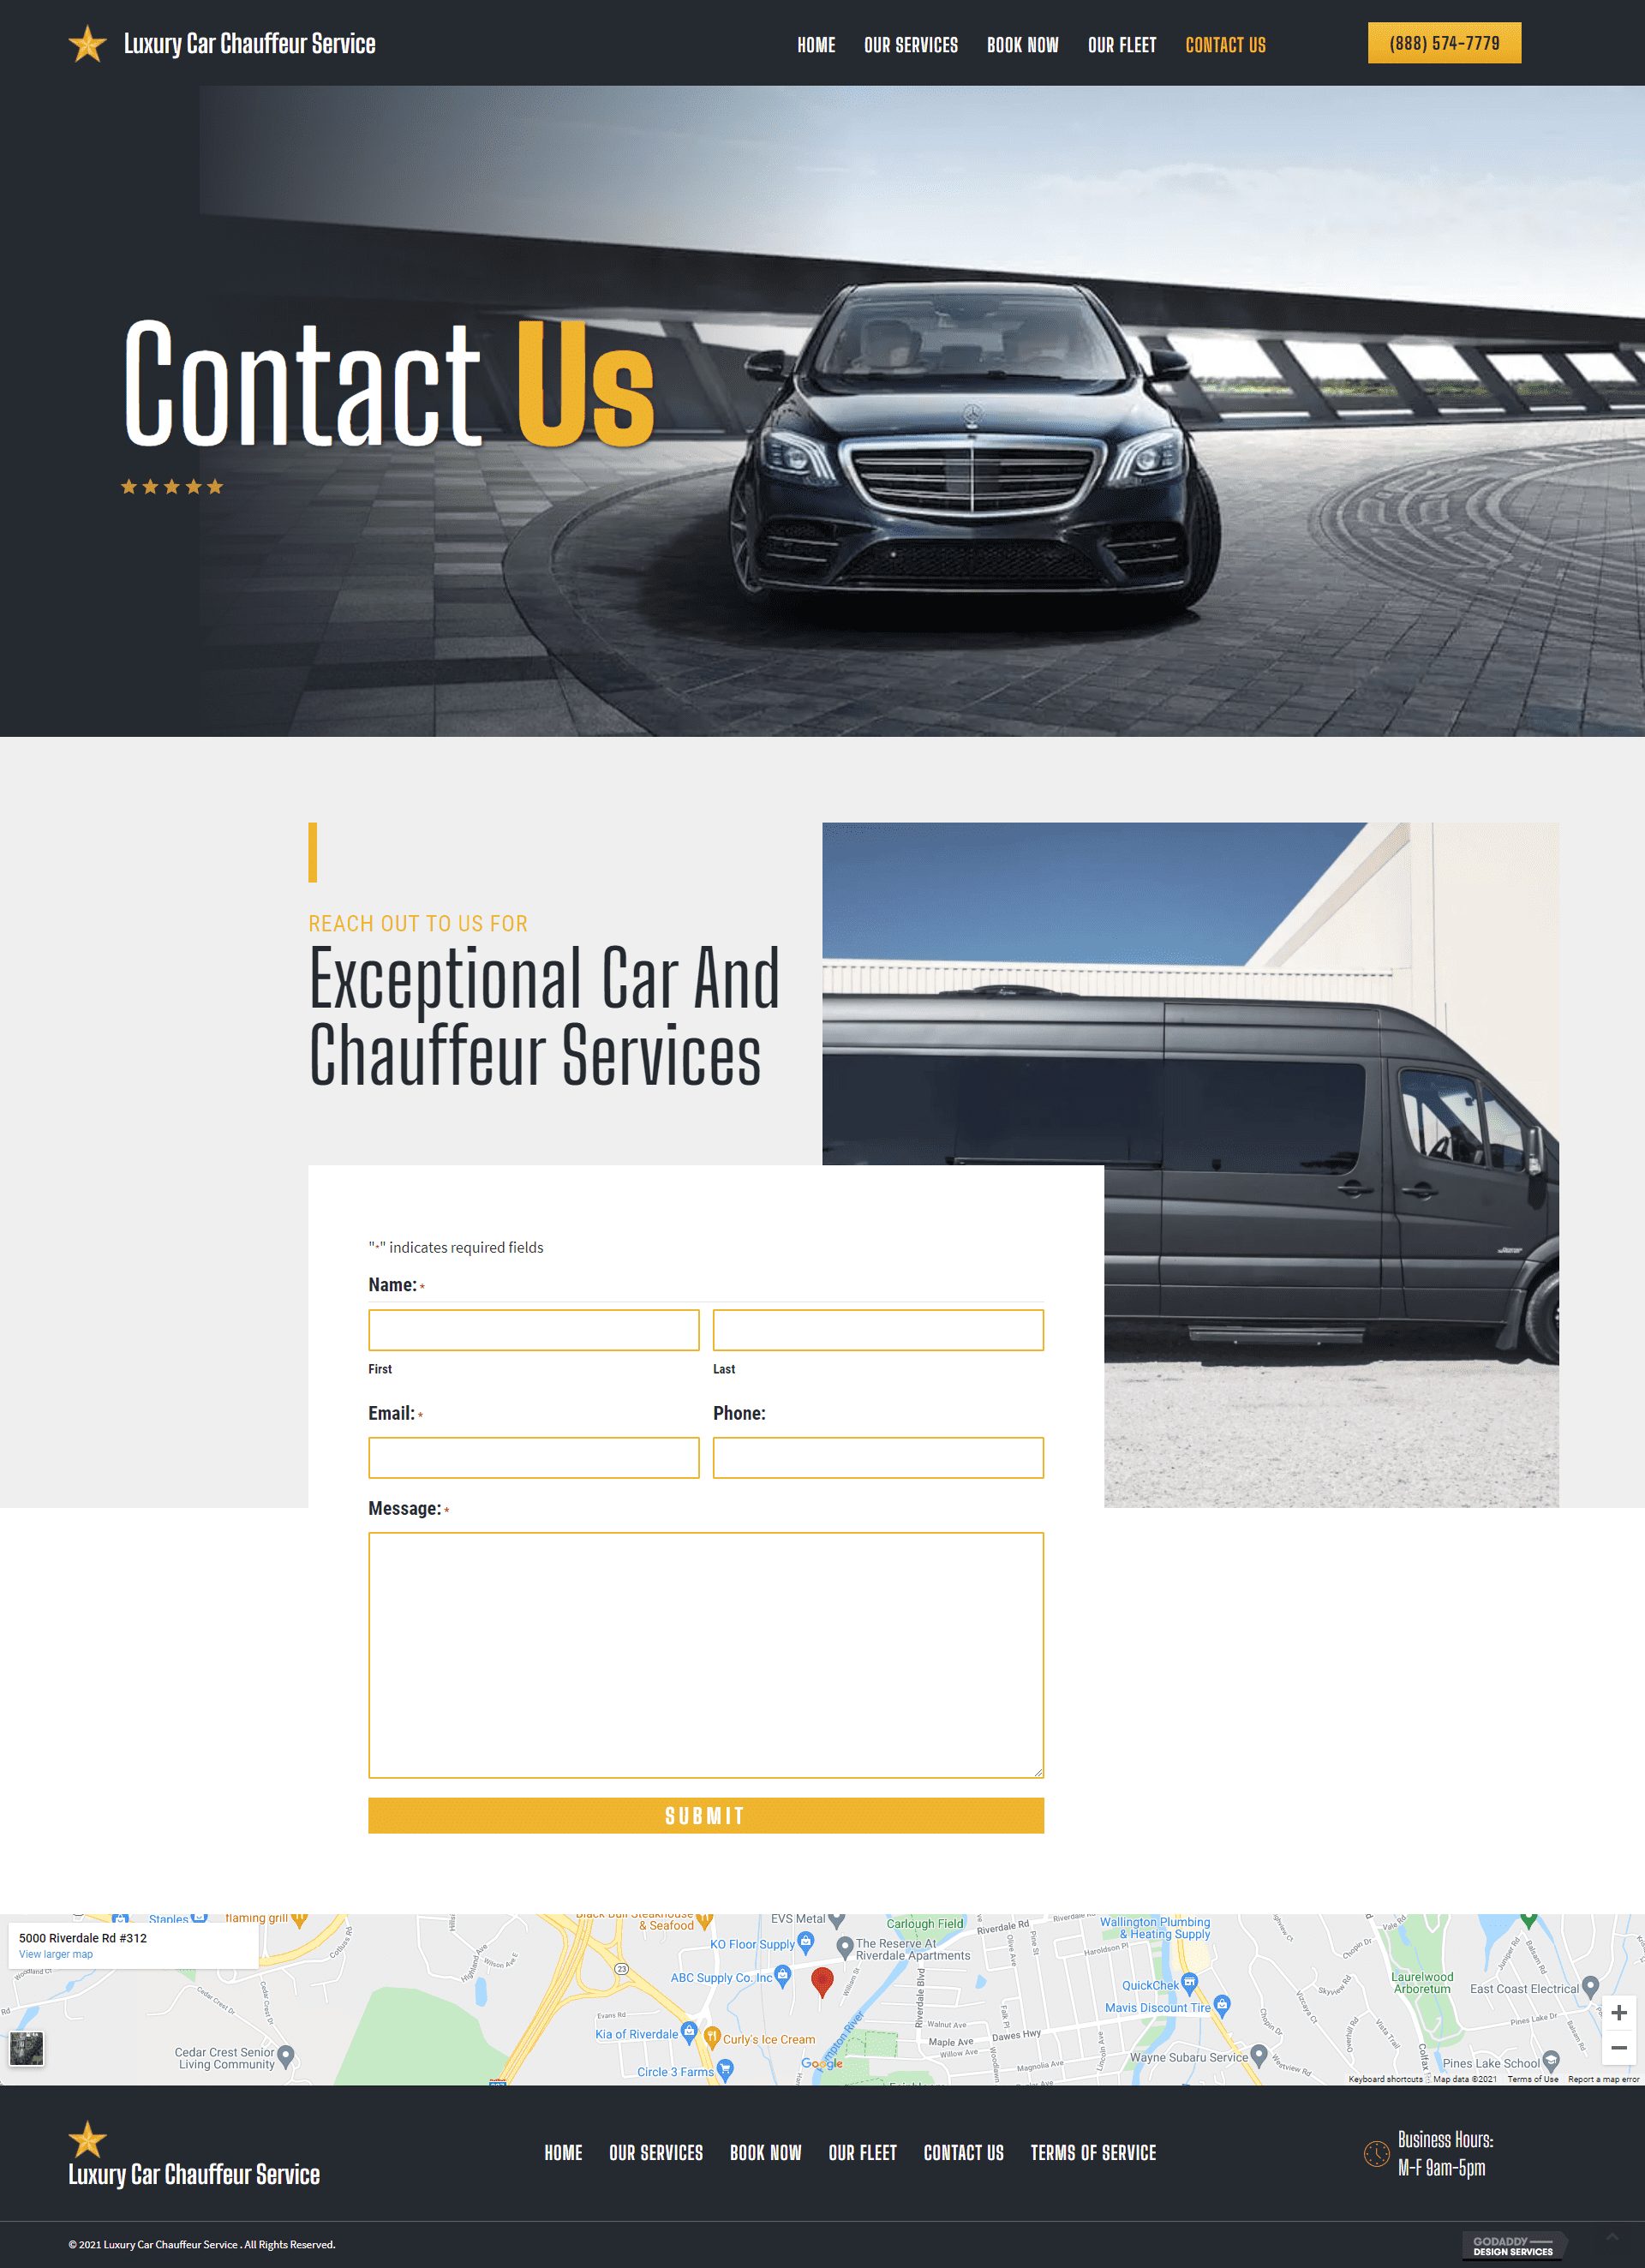 Luxury Car Chauffeur Service Contact